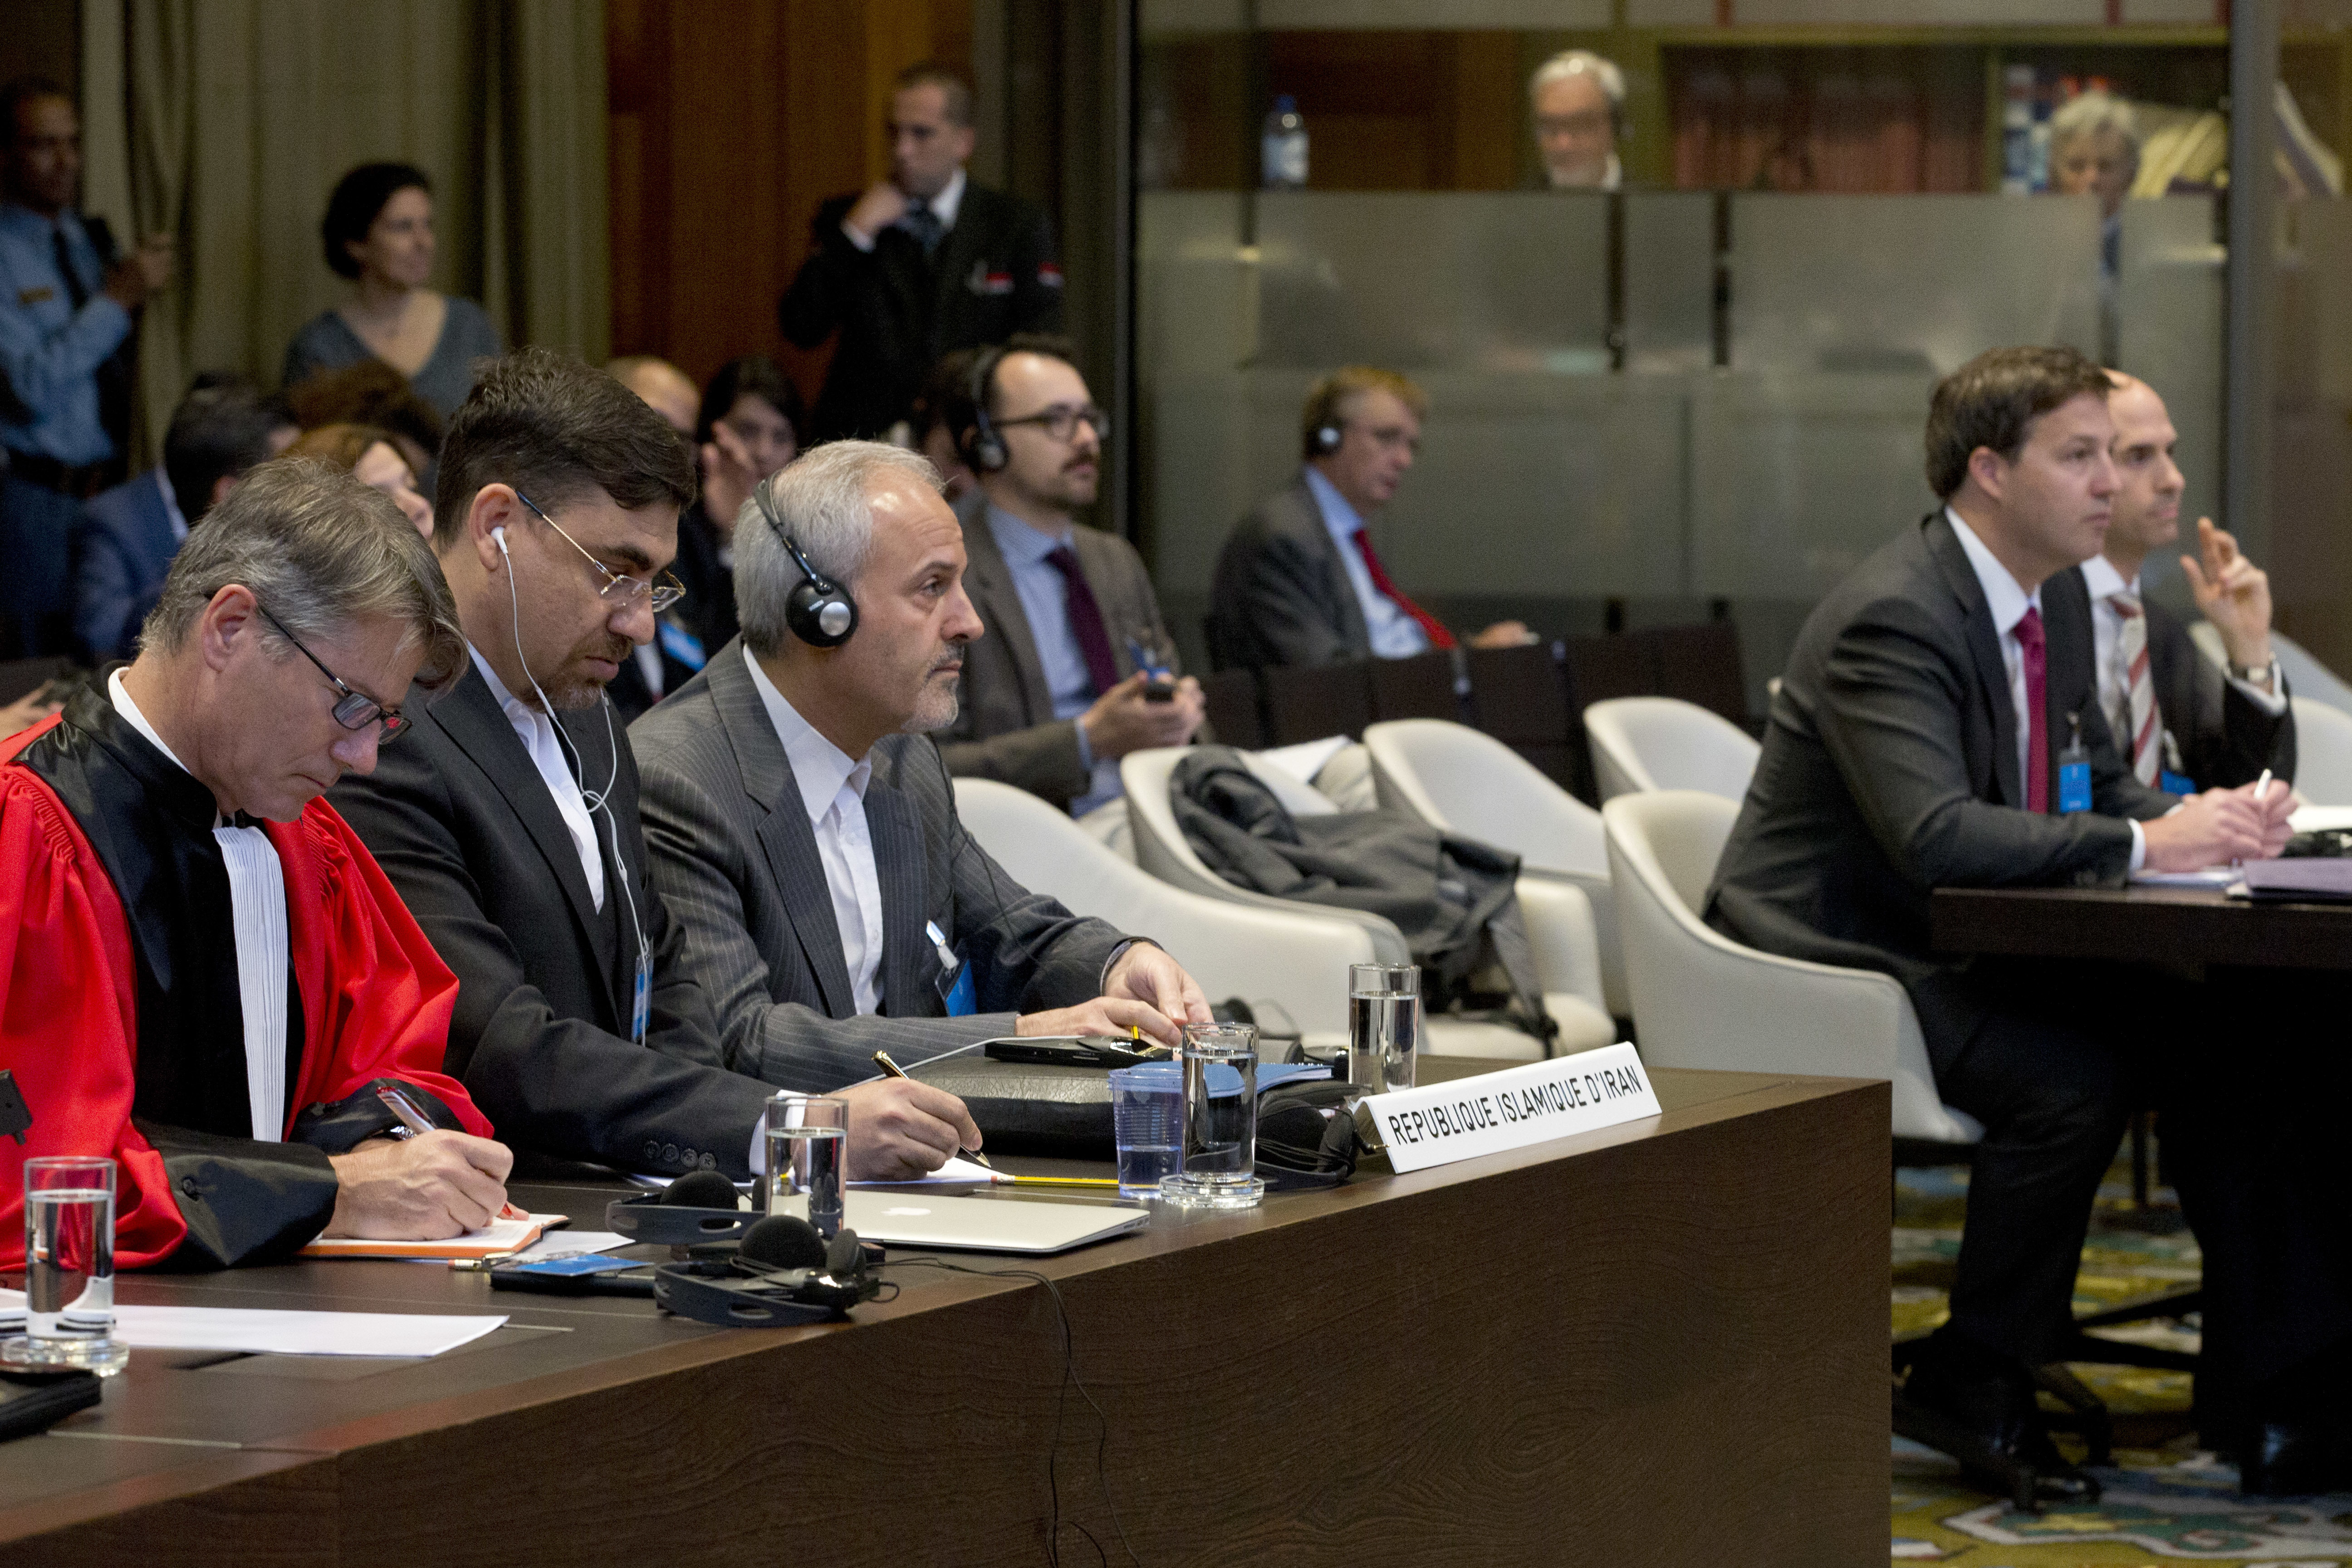 Mohammed Zahedin Labbaf, third left, of the Islamic Republic of Iran, and the US delegation, right, listen to the ruling of the judges at the International Court of Justice in The Hague, Netherlands